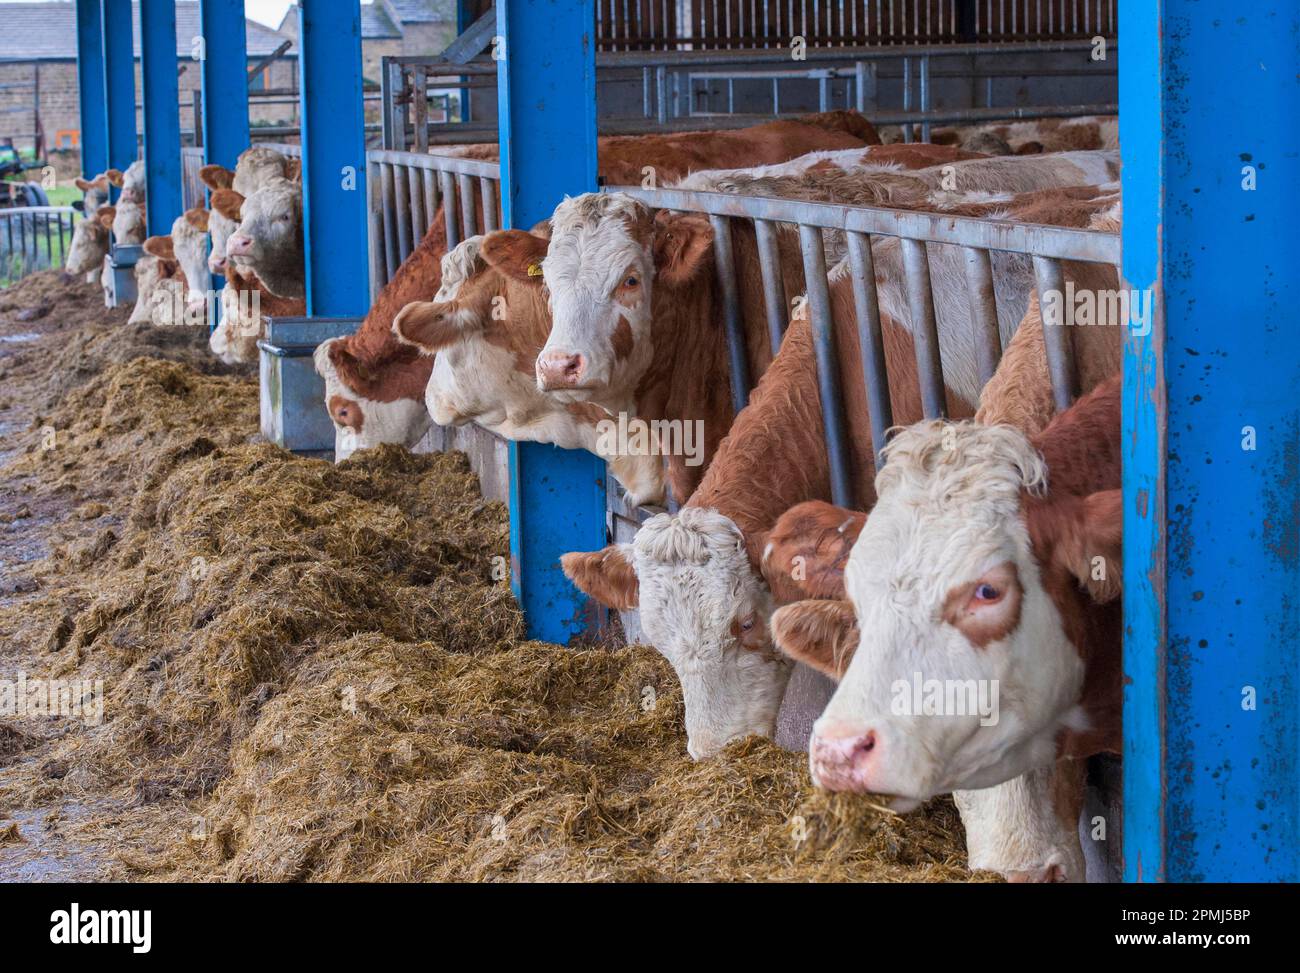 Domestic Cattle, Simmental herd, feeding on silage at feed barrier, Yorkshire, England, United Kingdom Stock Photo